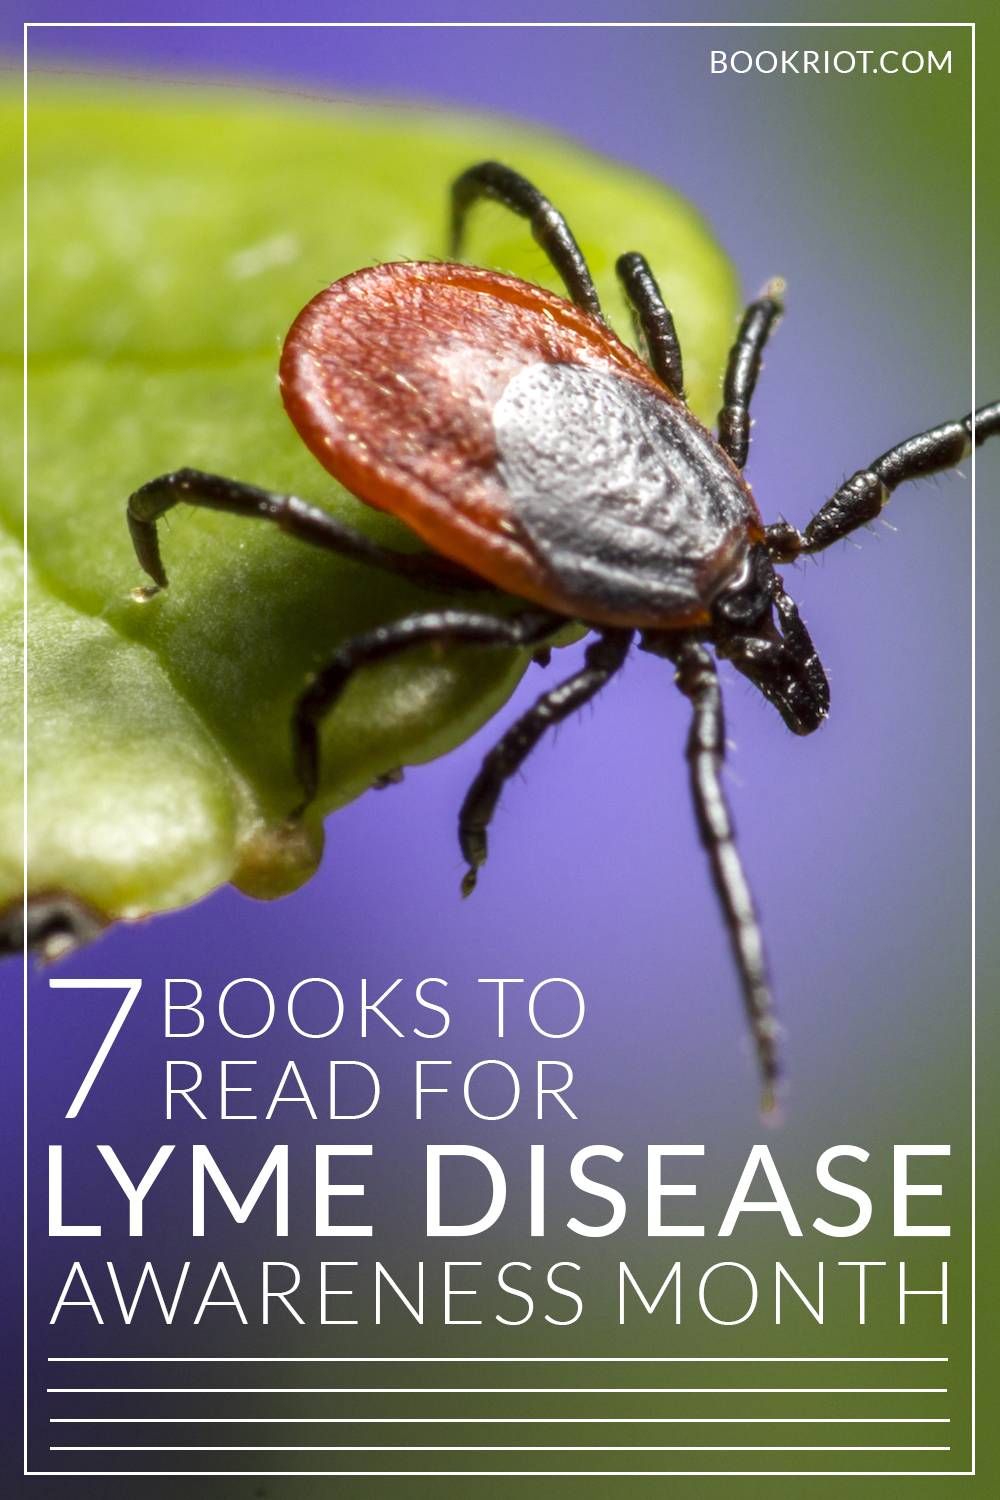 Tick season is here! Read up on Lyme disease and keep your family safe!